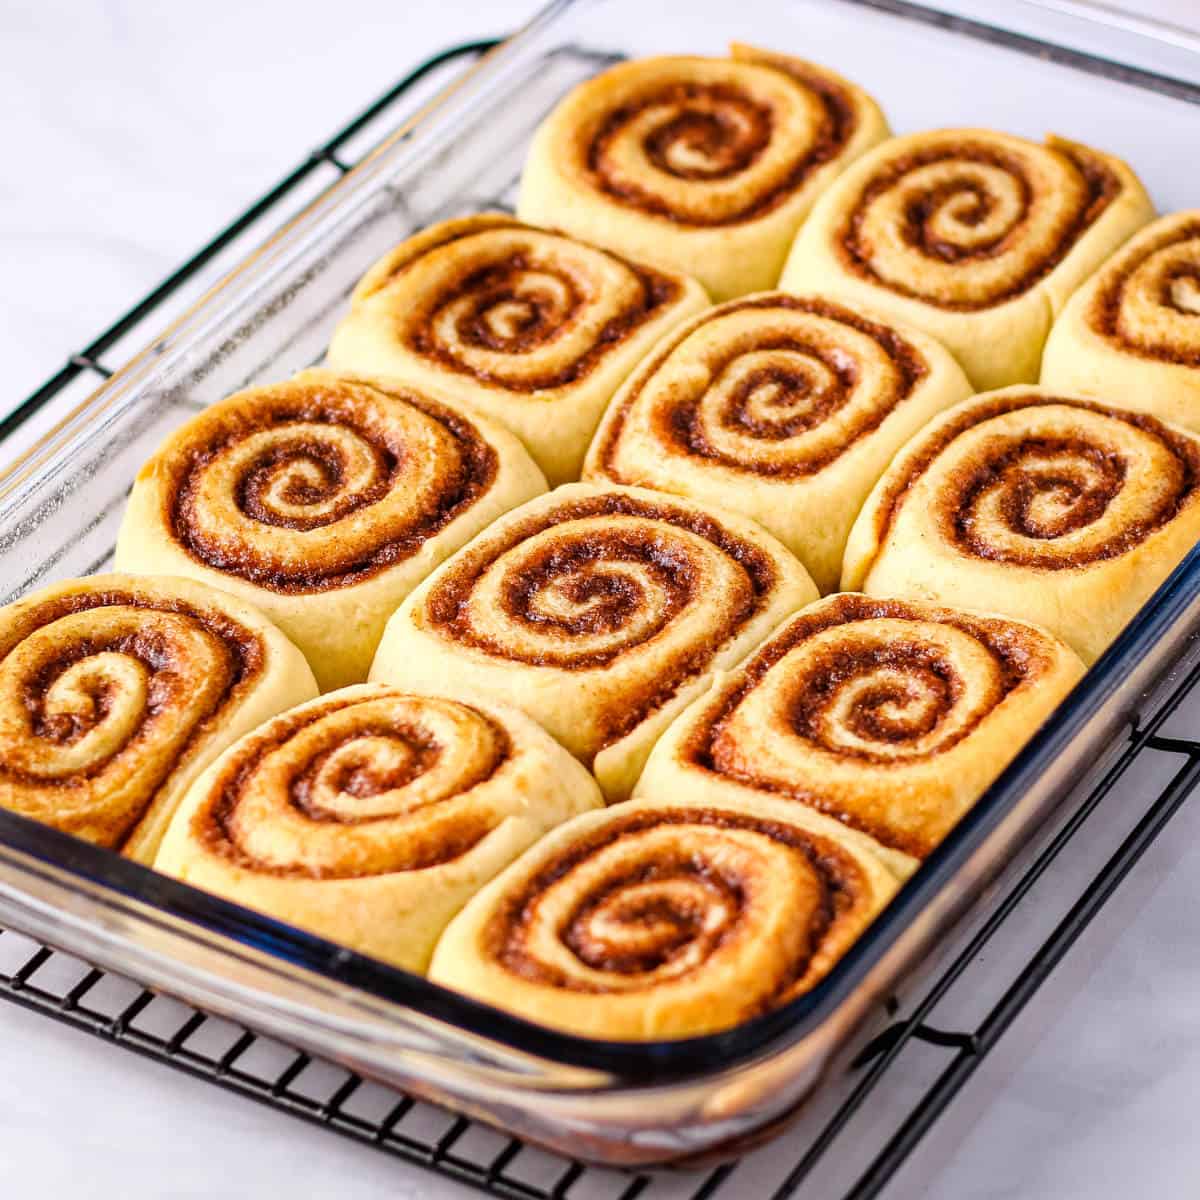 Baked cinnamon rolls in a clear glass baking dish.